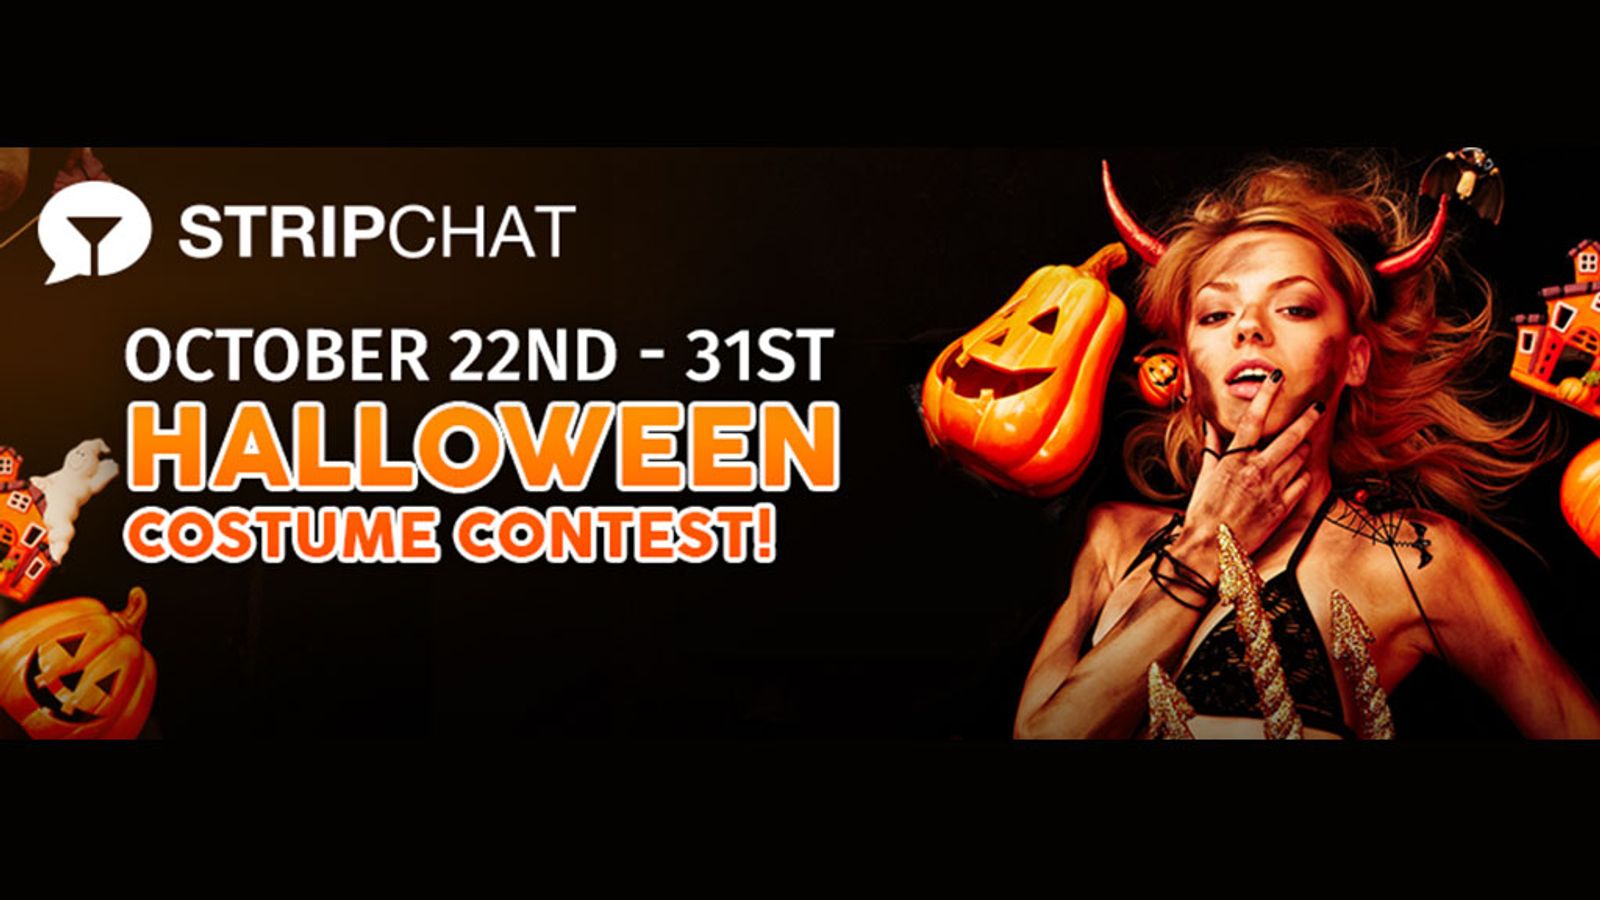 Stripchat Launches 2 Halloween Contests For Models, Members